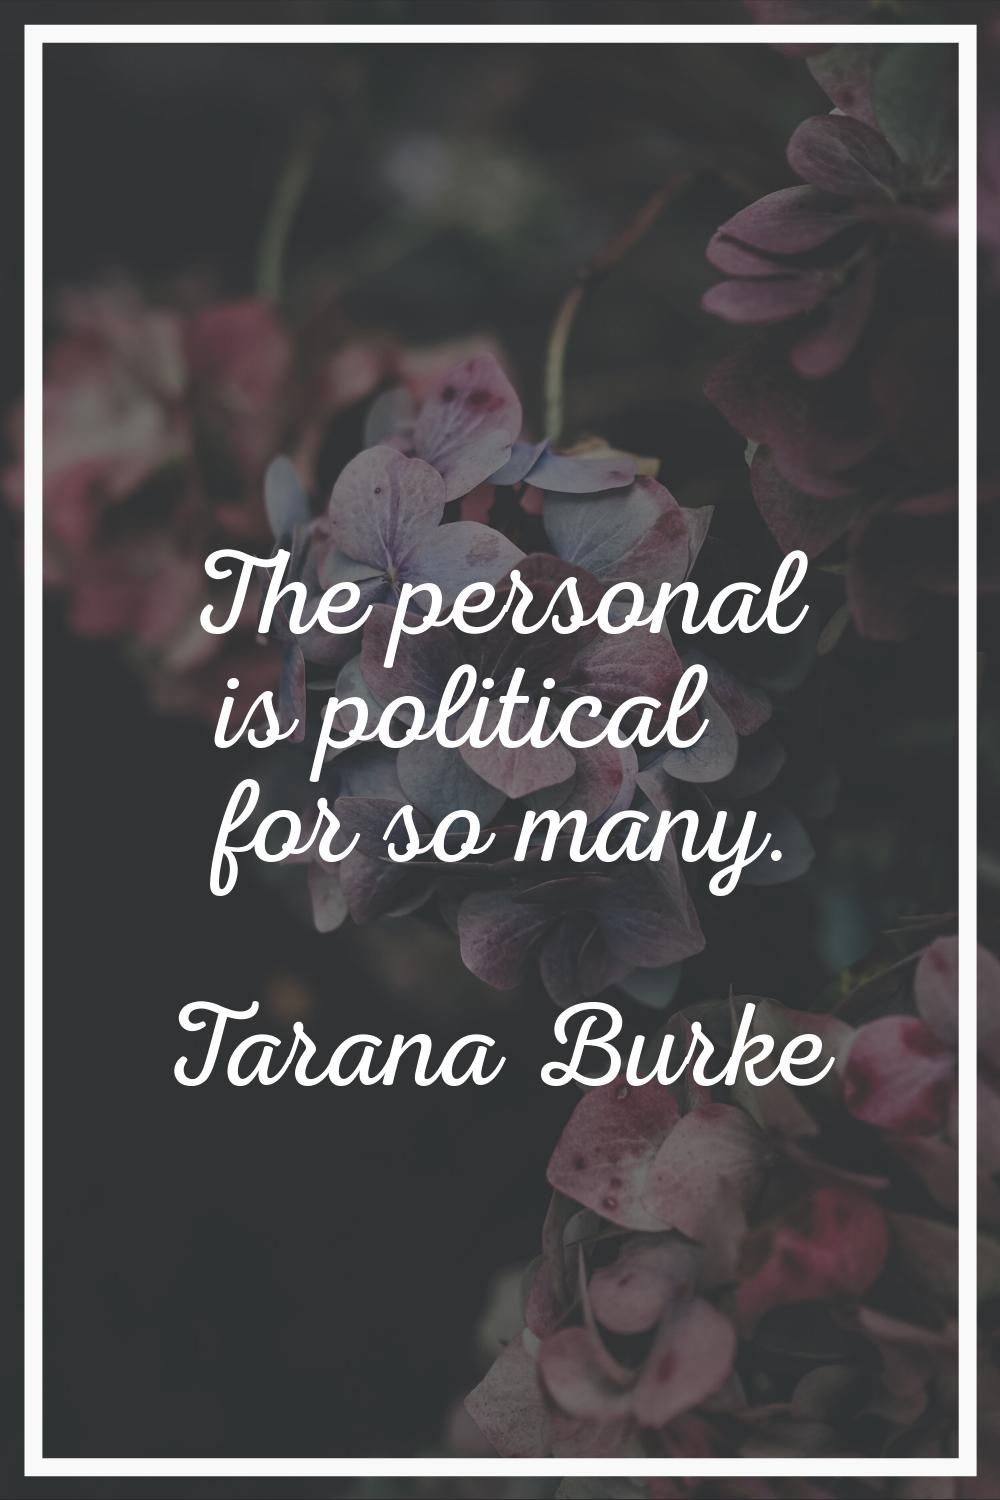 The personal is political for so many.